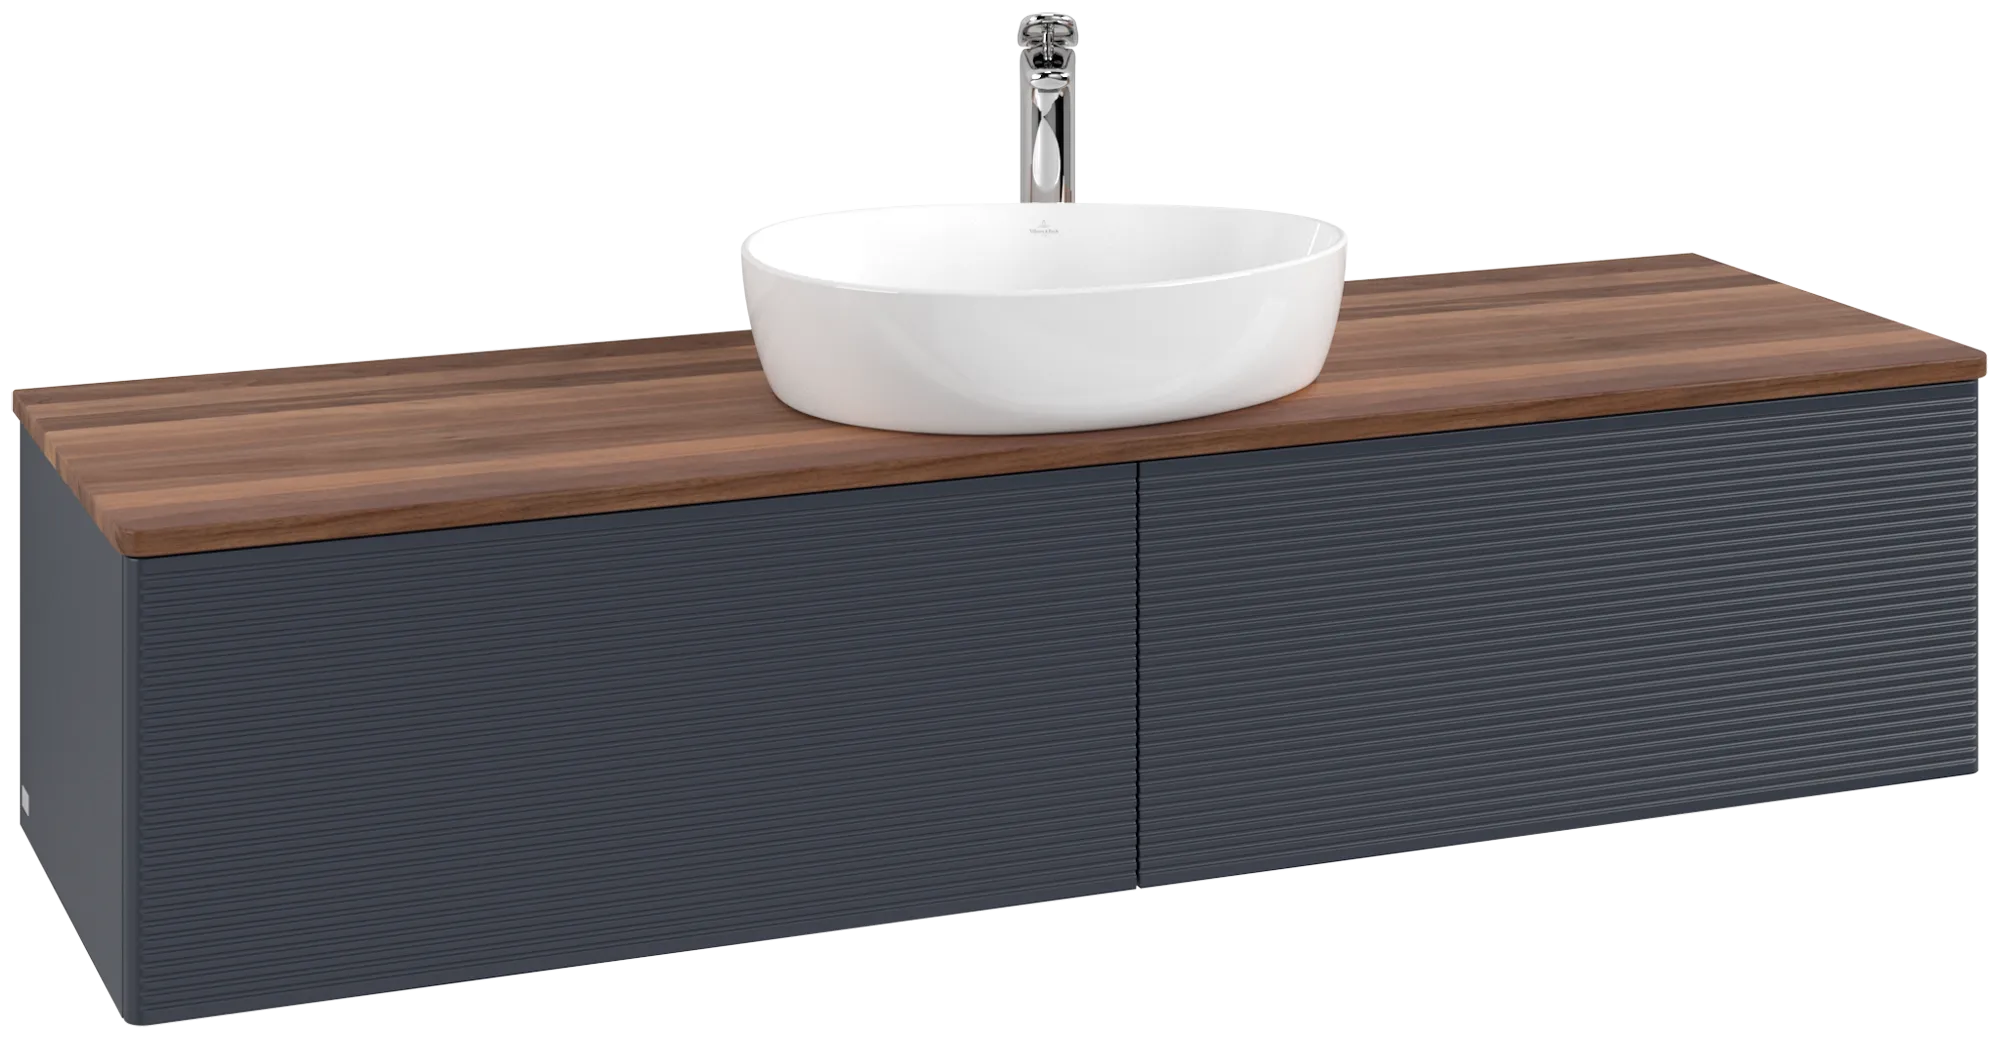 VILLEROY BOCH Antao Vanity unit, 2 pull-out compartments, 1600 x 360 x 500 mm, Front with grain texture, Midnight Blue Matt Lacquer / Warm Walnut #K36152HG resmi